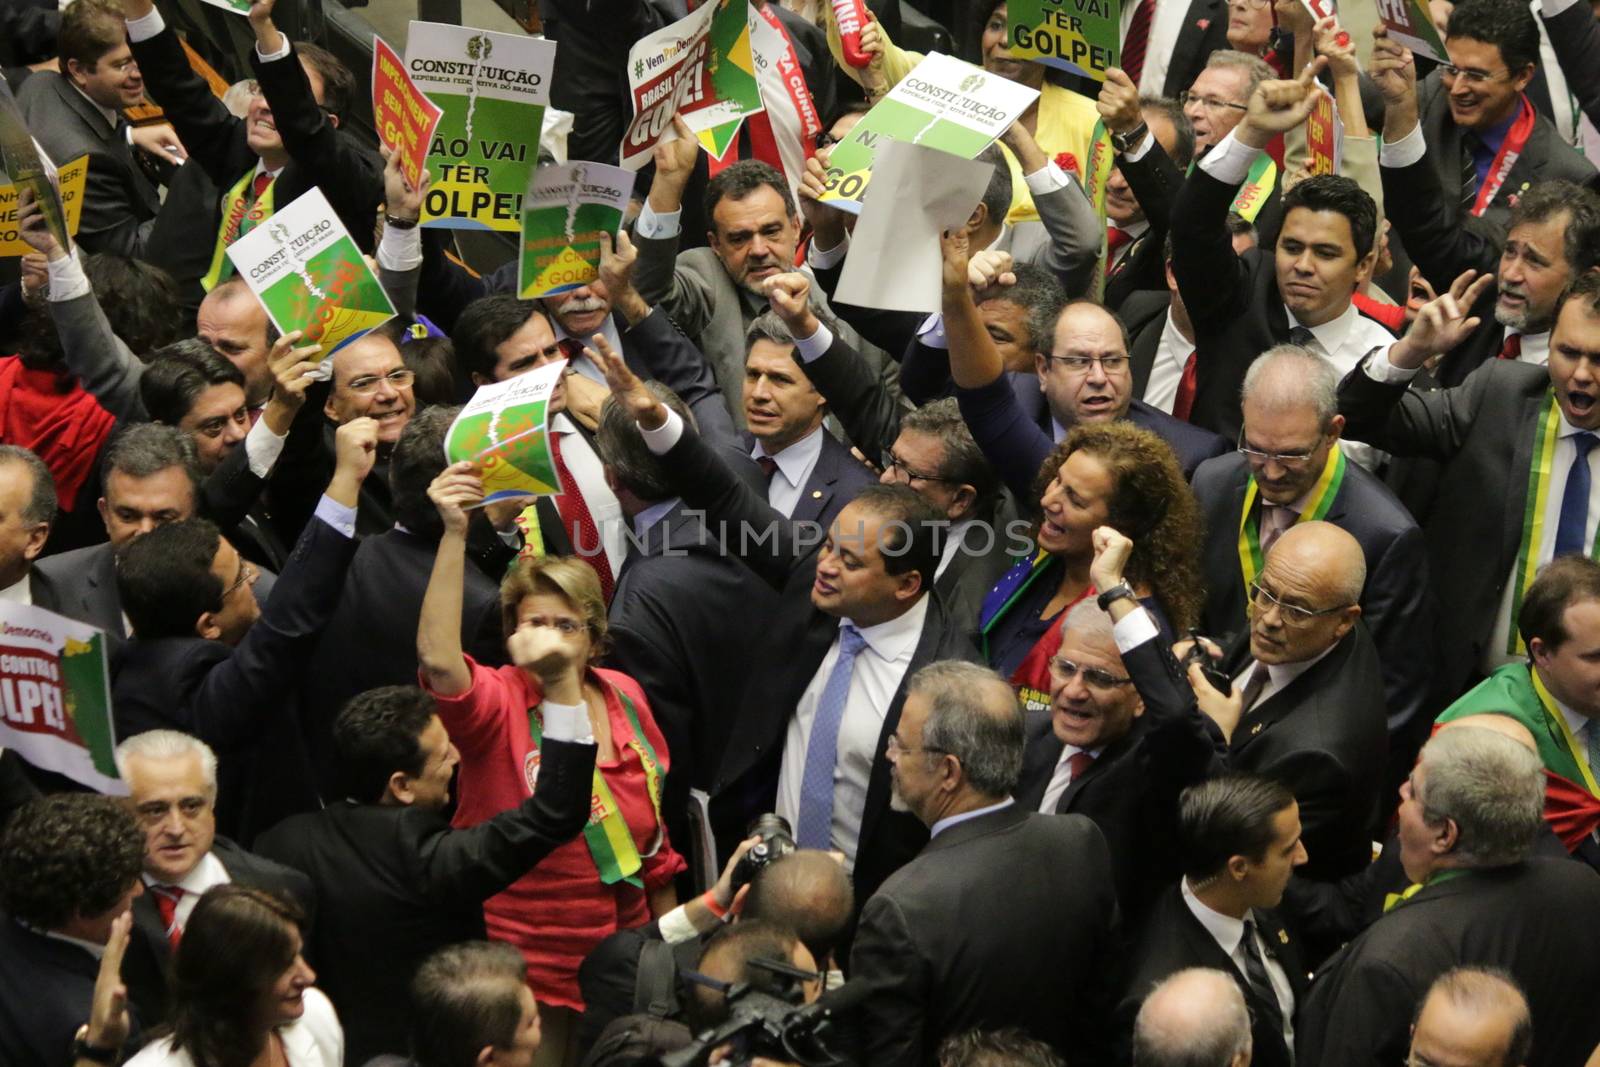 BRAZIL, Brasilia: Members of parliament hold up signs during the impeachment proceedings for President Dilma Rousseff on April 17, 2016 in Brasilia. Some members of parliament began signing, shouting and throwing confetti as the proceedings turned chaotic. The impeachment issue has divided Brazil over the past few weeks with some in support of impeaching Rousseff, while others are strongly opposed. Brazil's lower house is voting on whether to continue impeachment proceedings. 342 out of 513 votes are needed to continue the proceedings to the upper house.